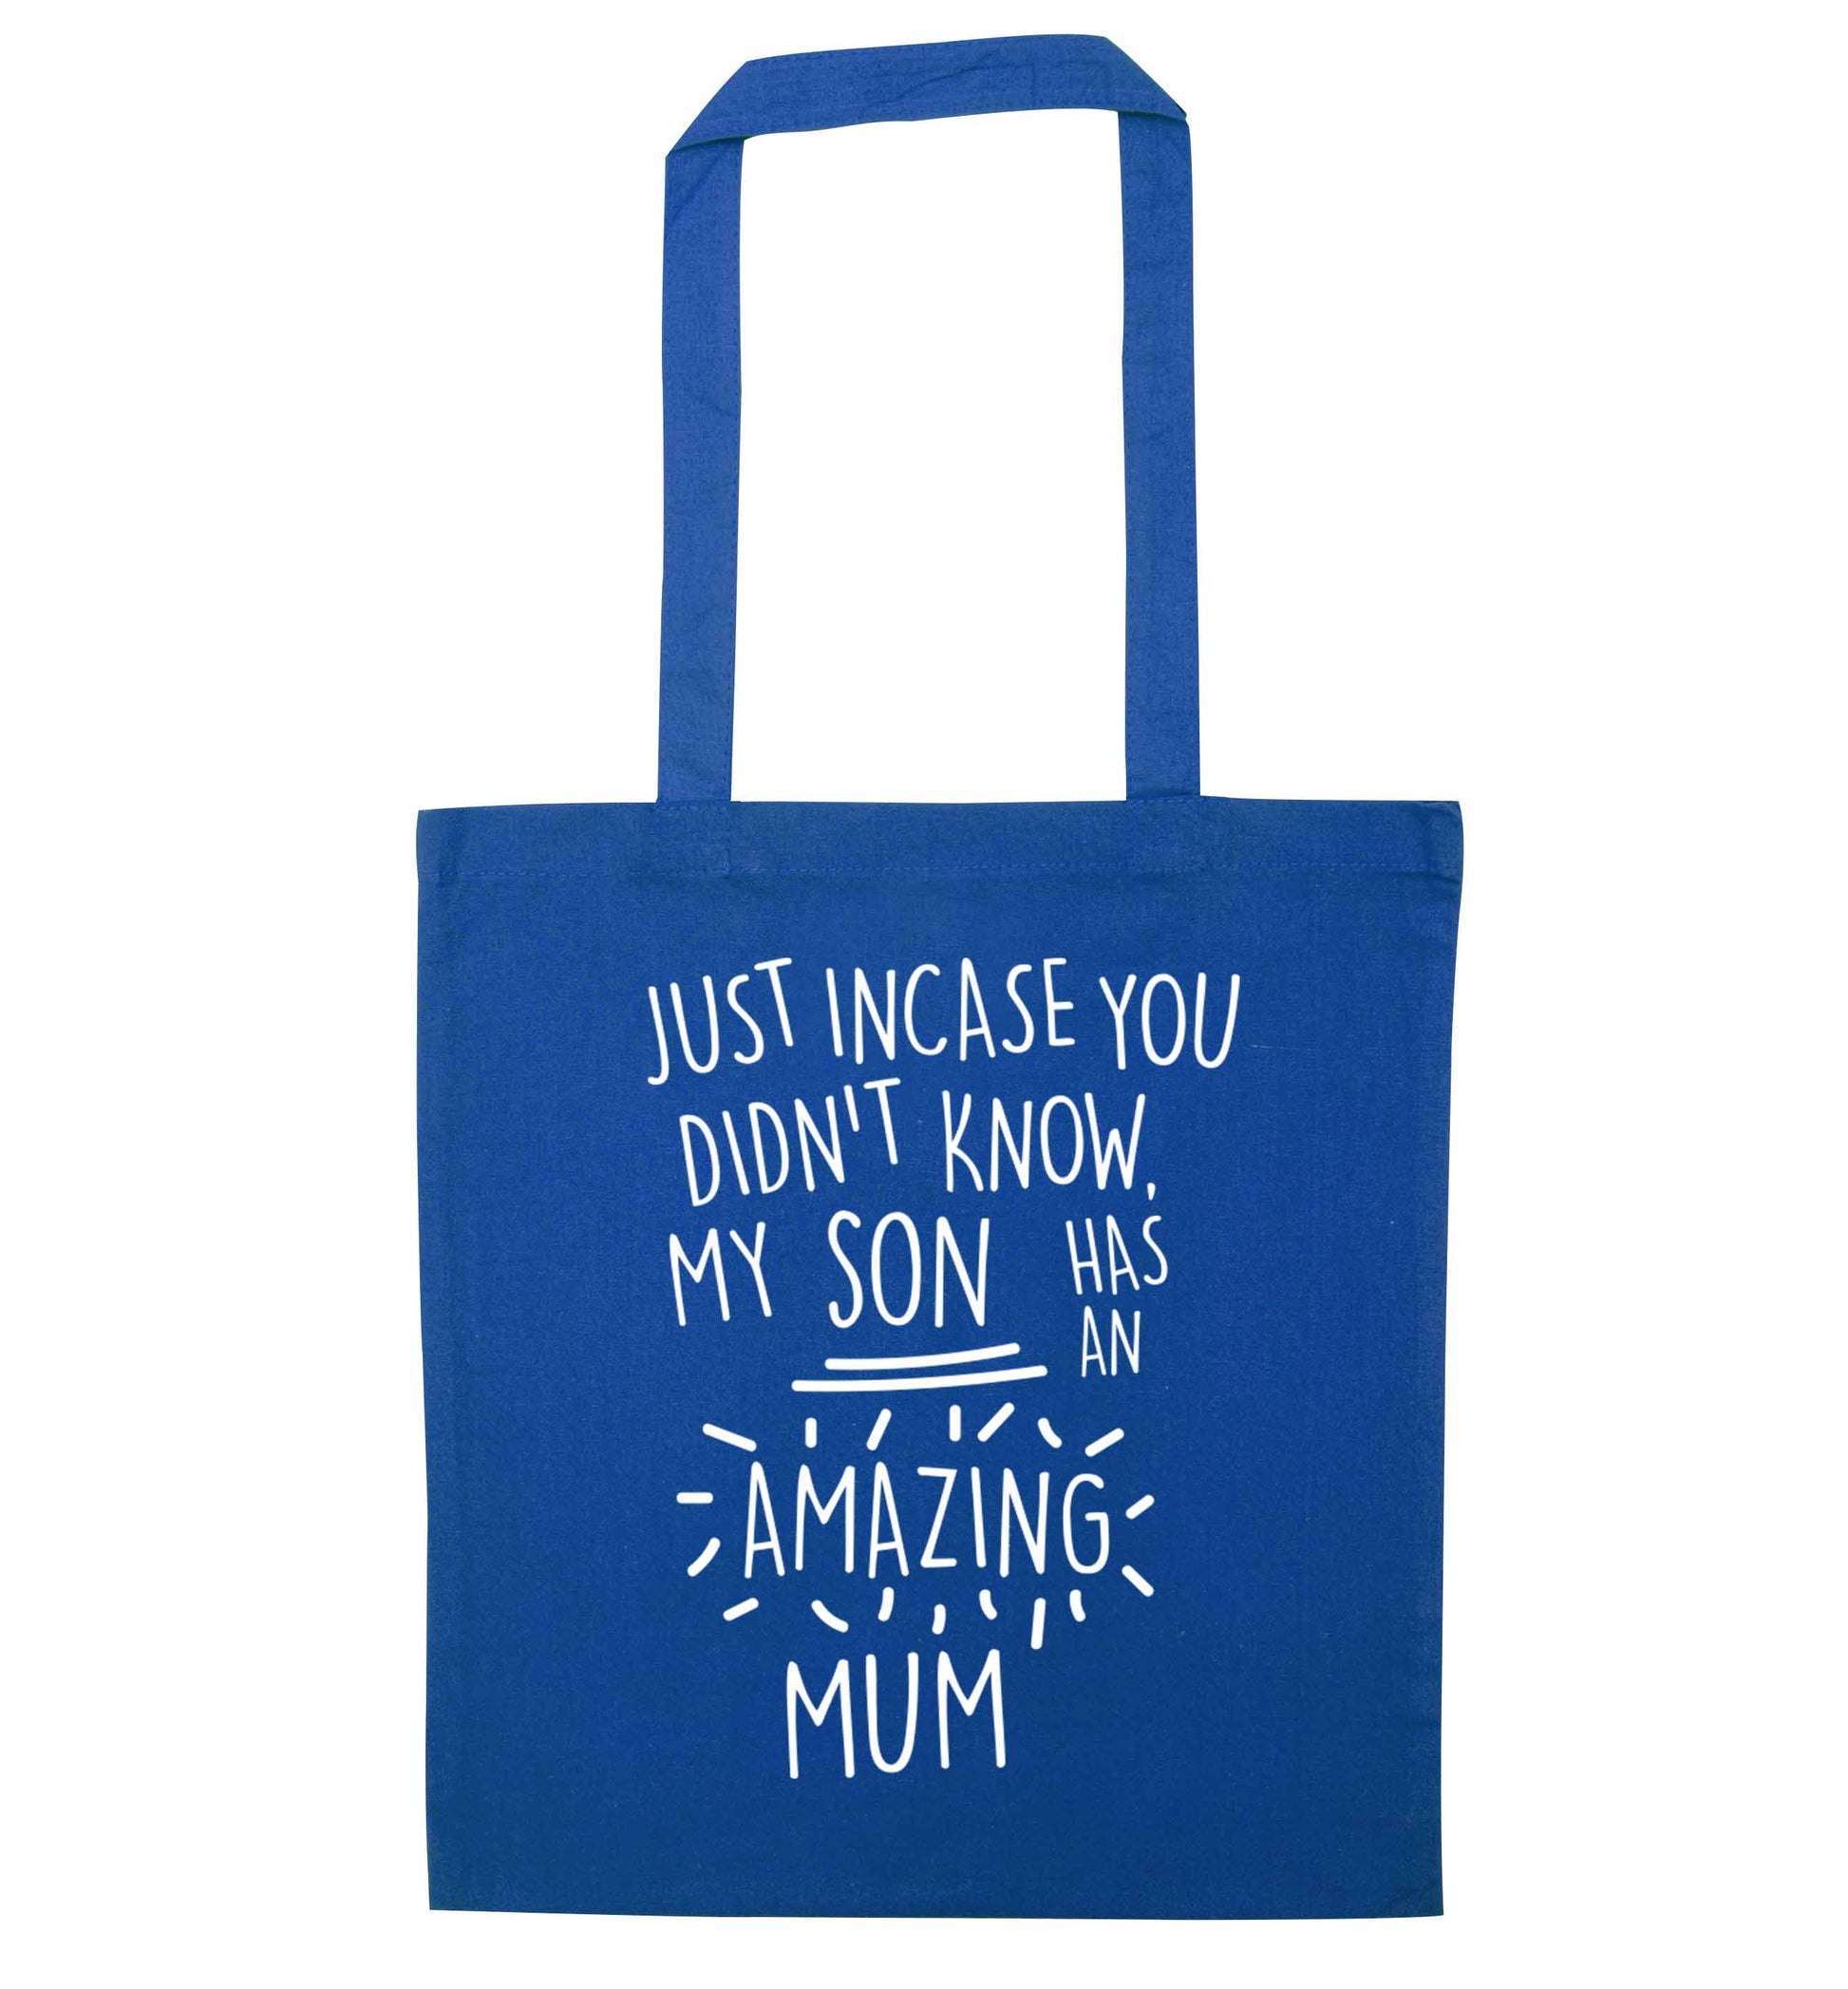 Just incase you didn't know my son has an amazing mum blue tote bag